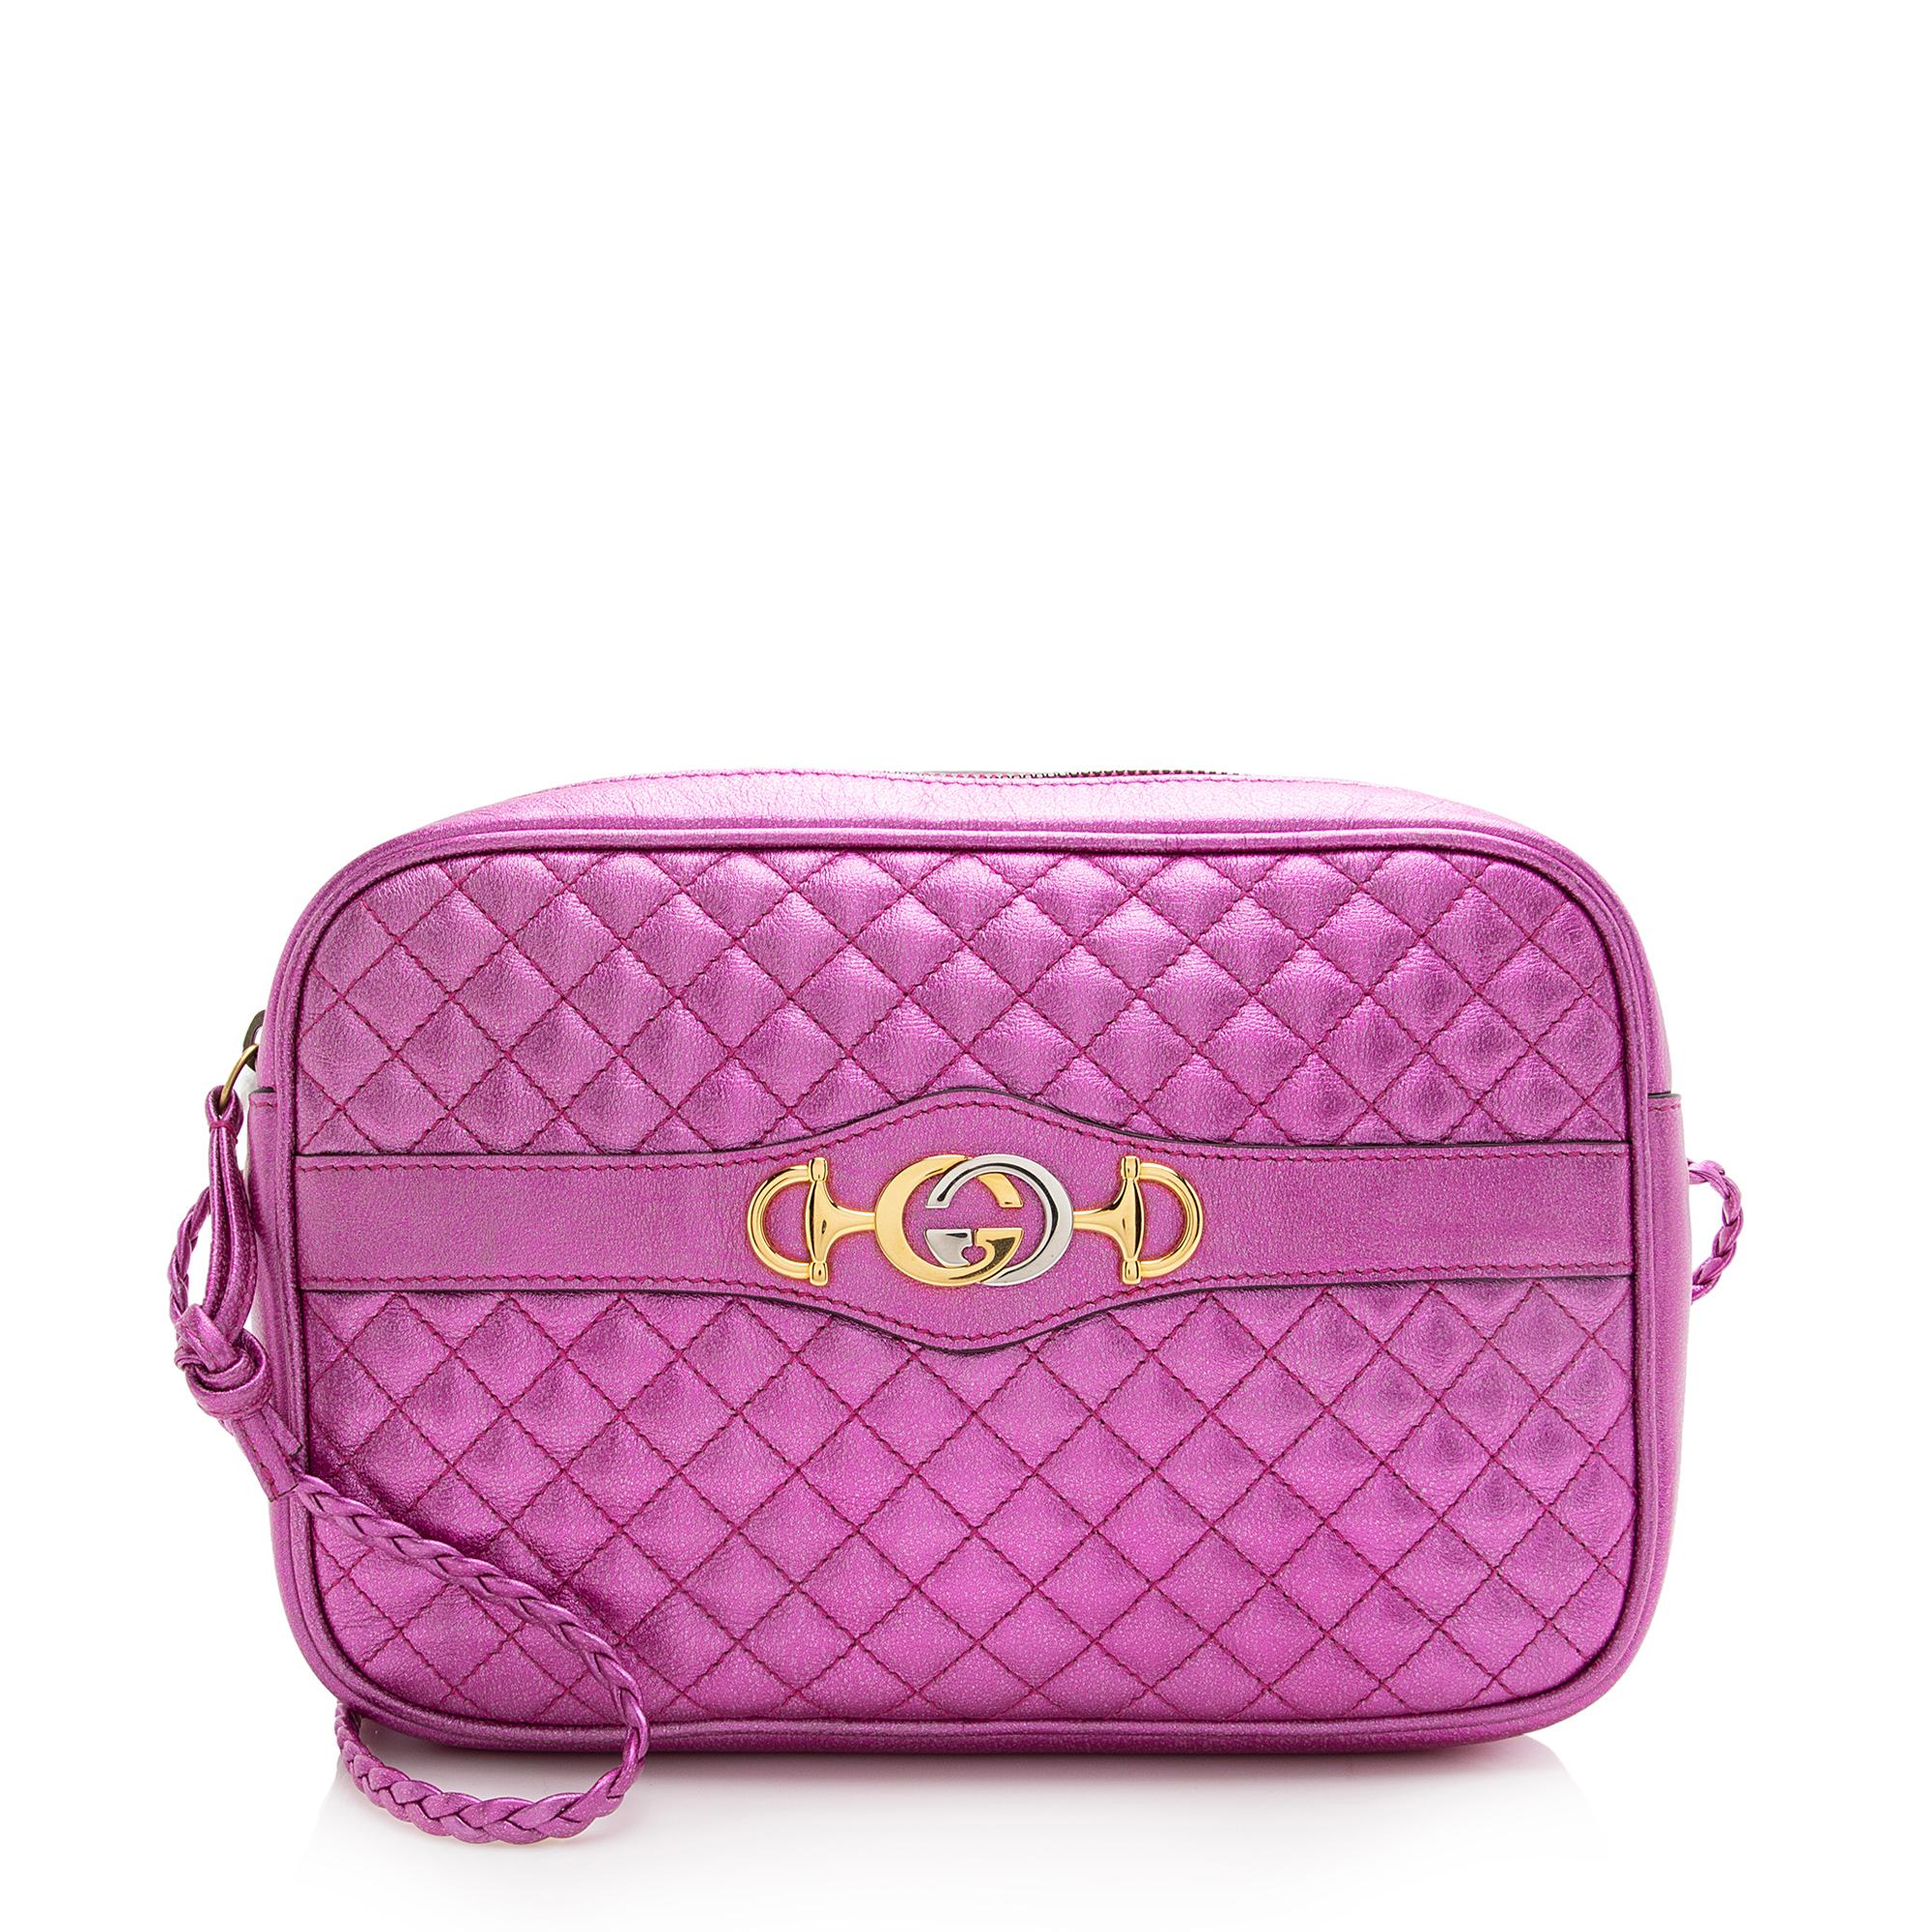 Gucci Metallic Quilted Leather Trapuntata Small Shoulder Bag